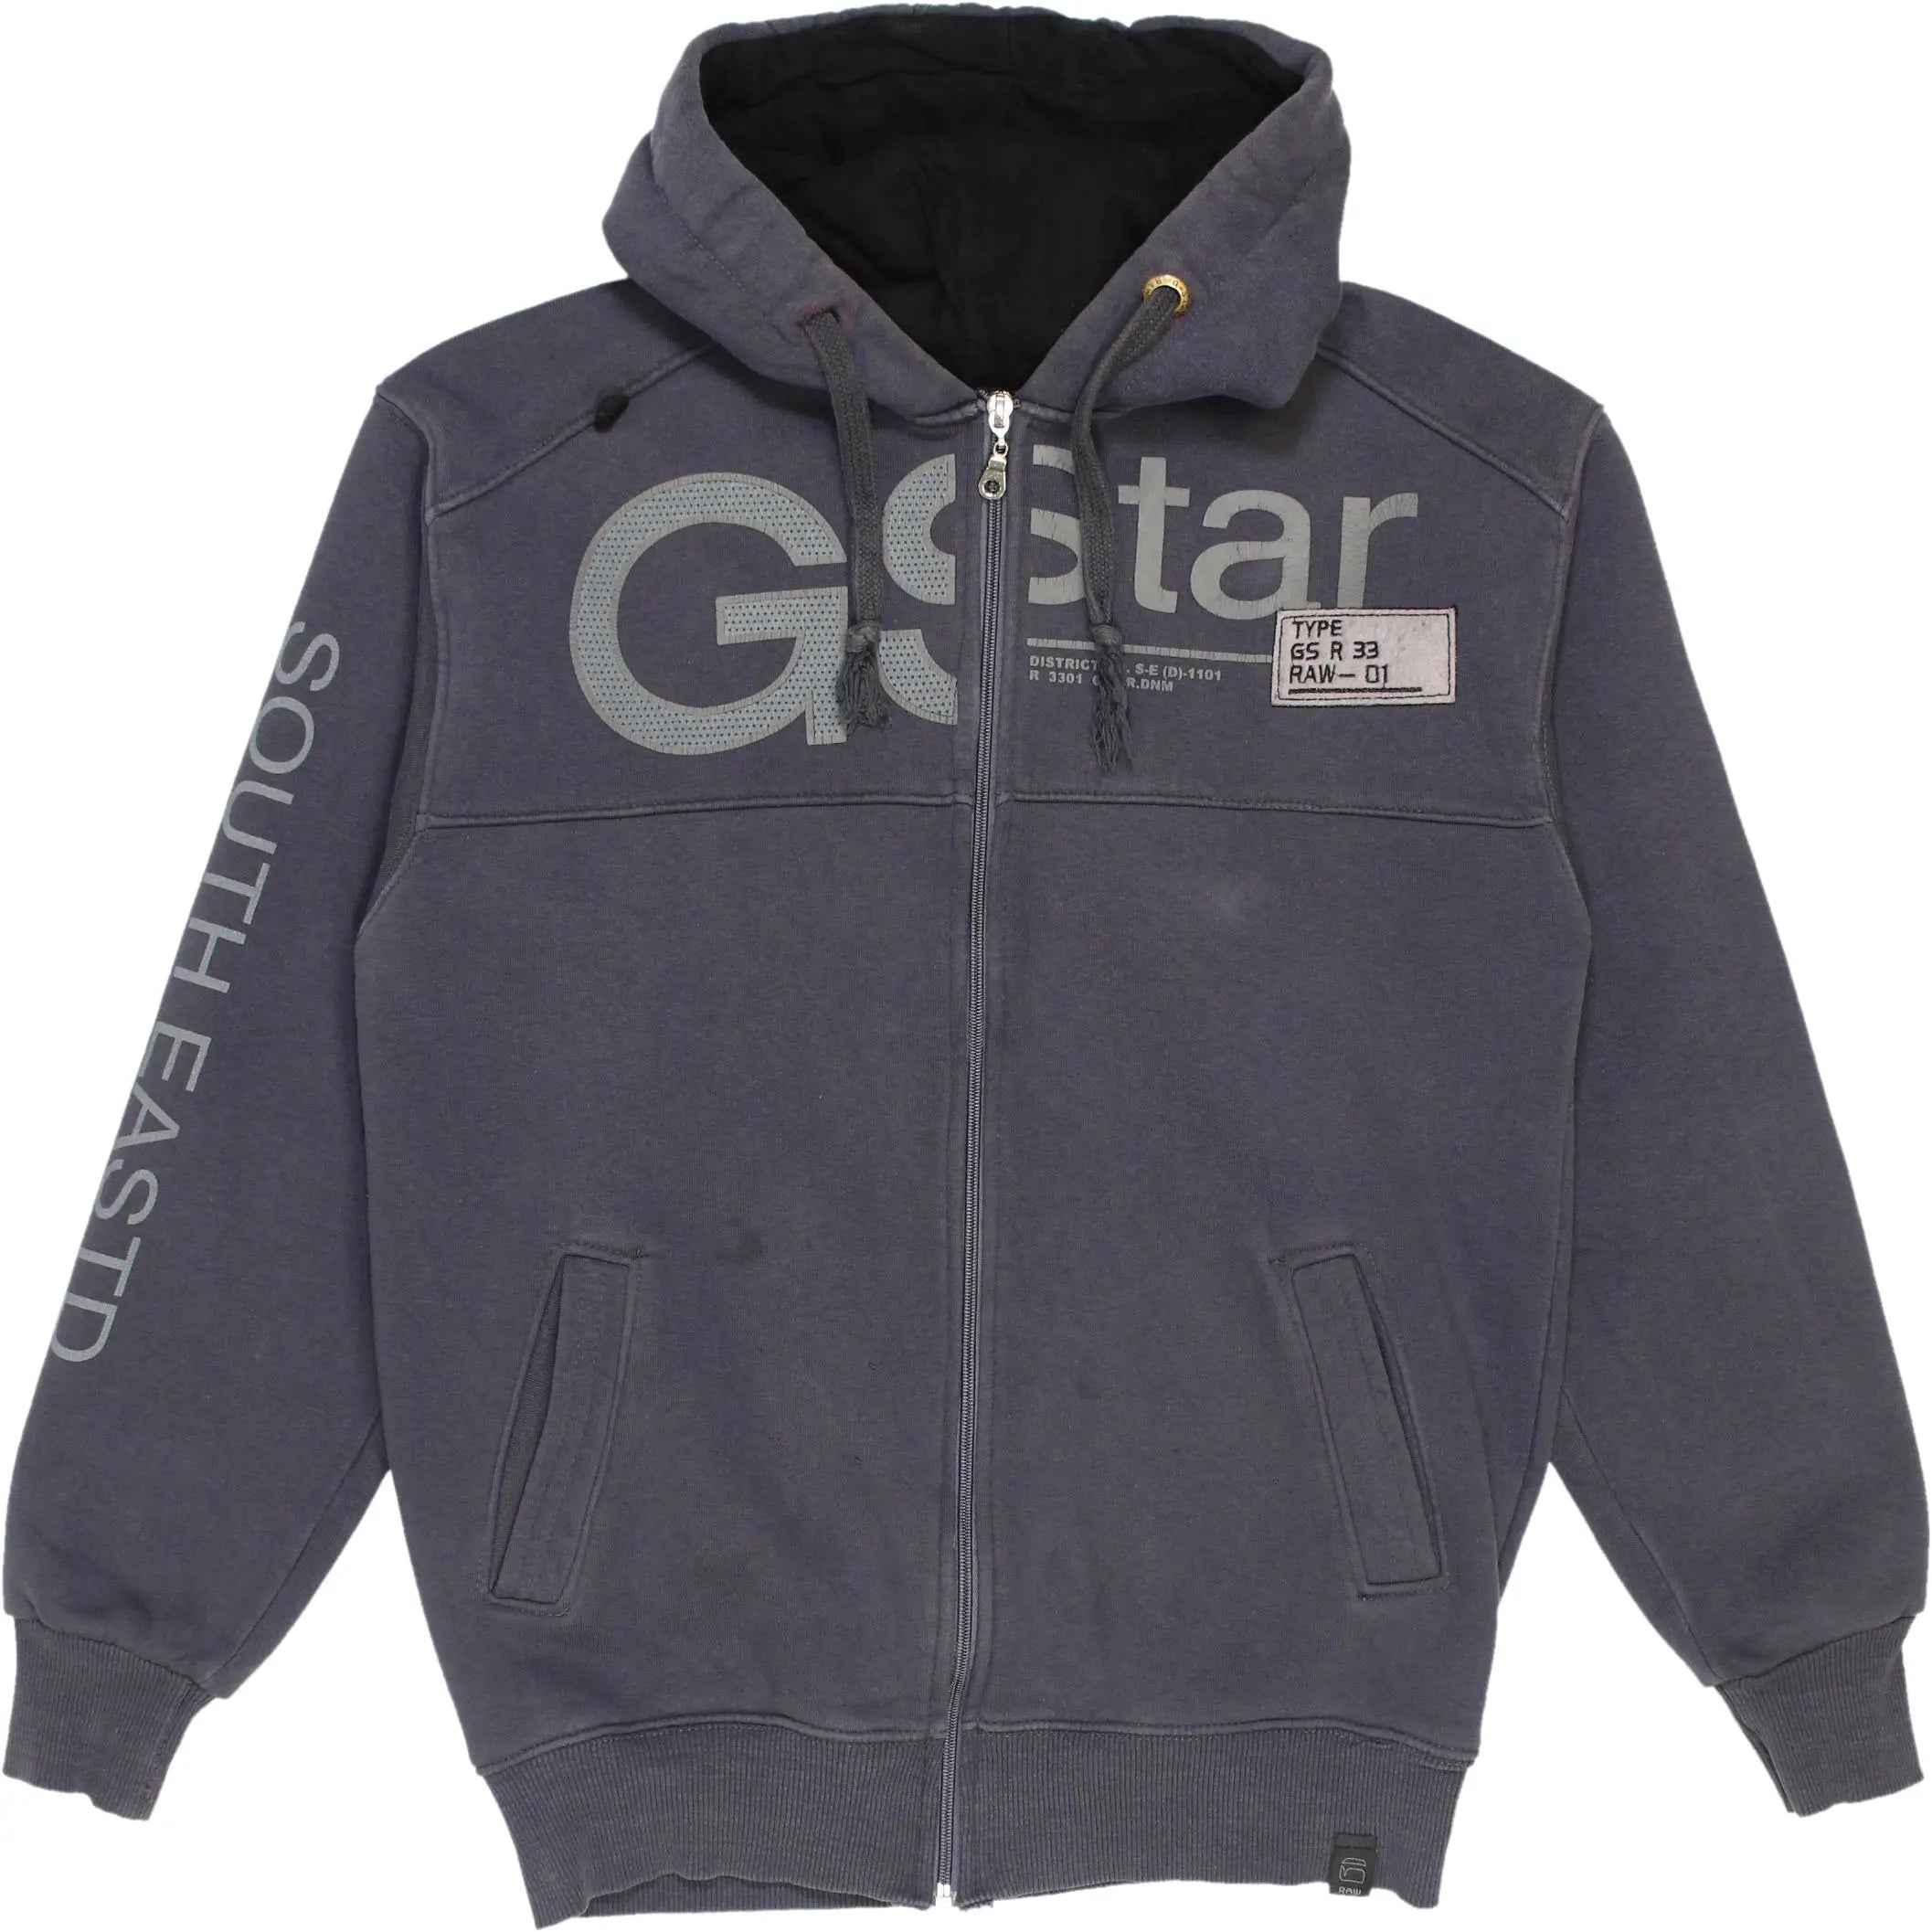 G-Star RAW - Hoodie with Zipper by G-Star- ThriftTale.com - Vintage and second handclothing